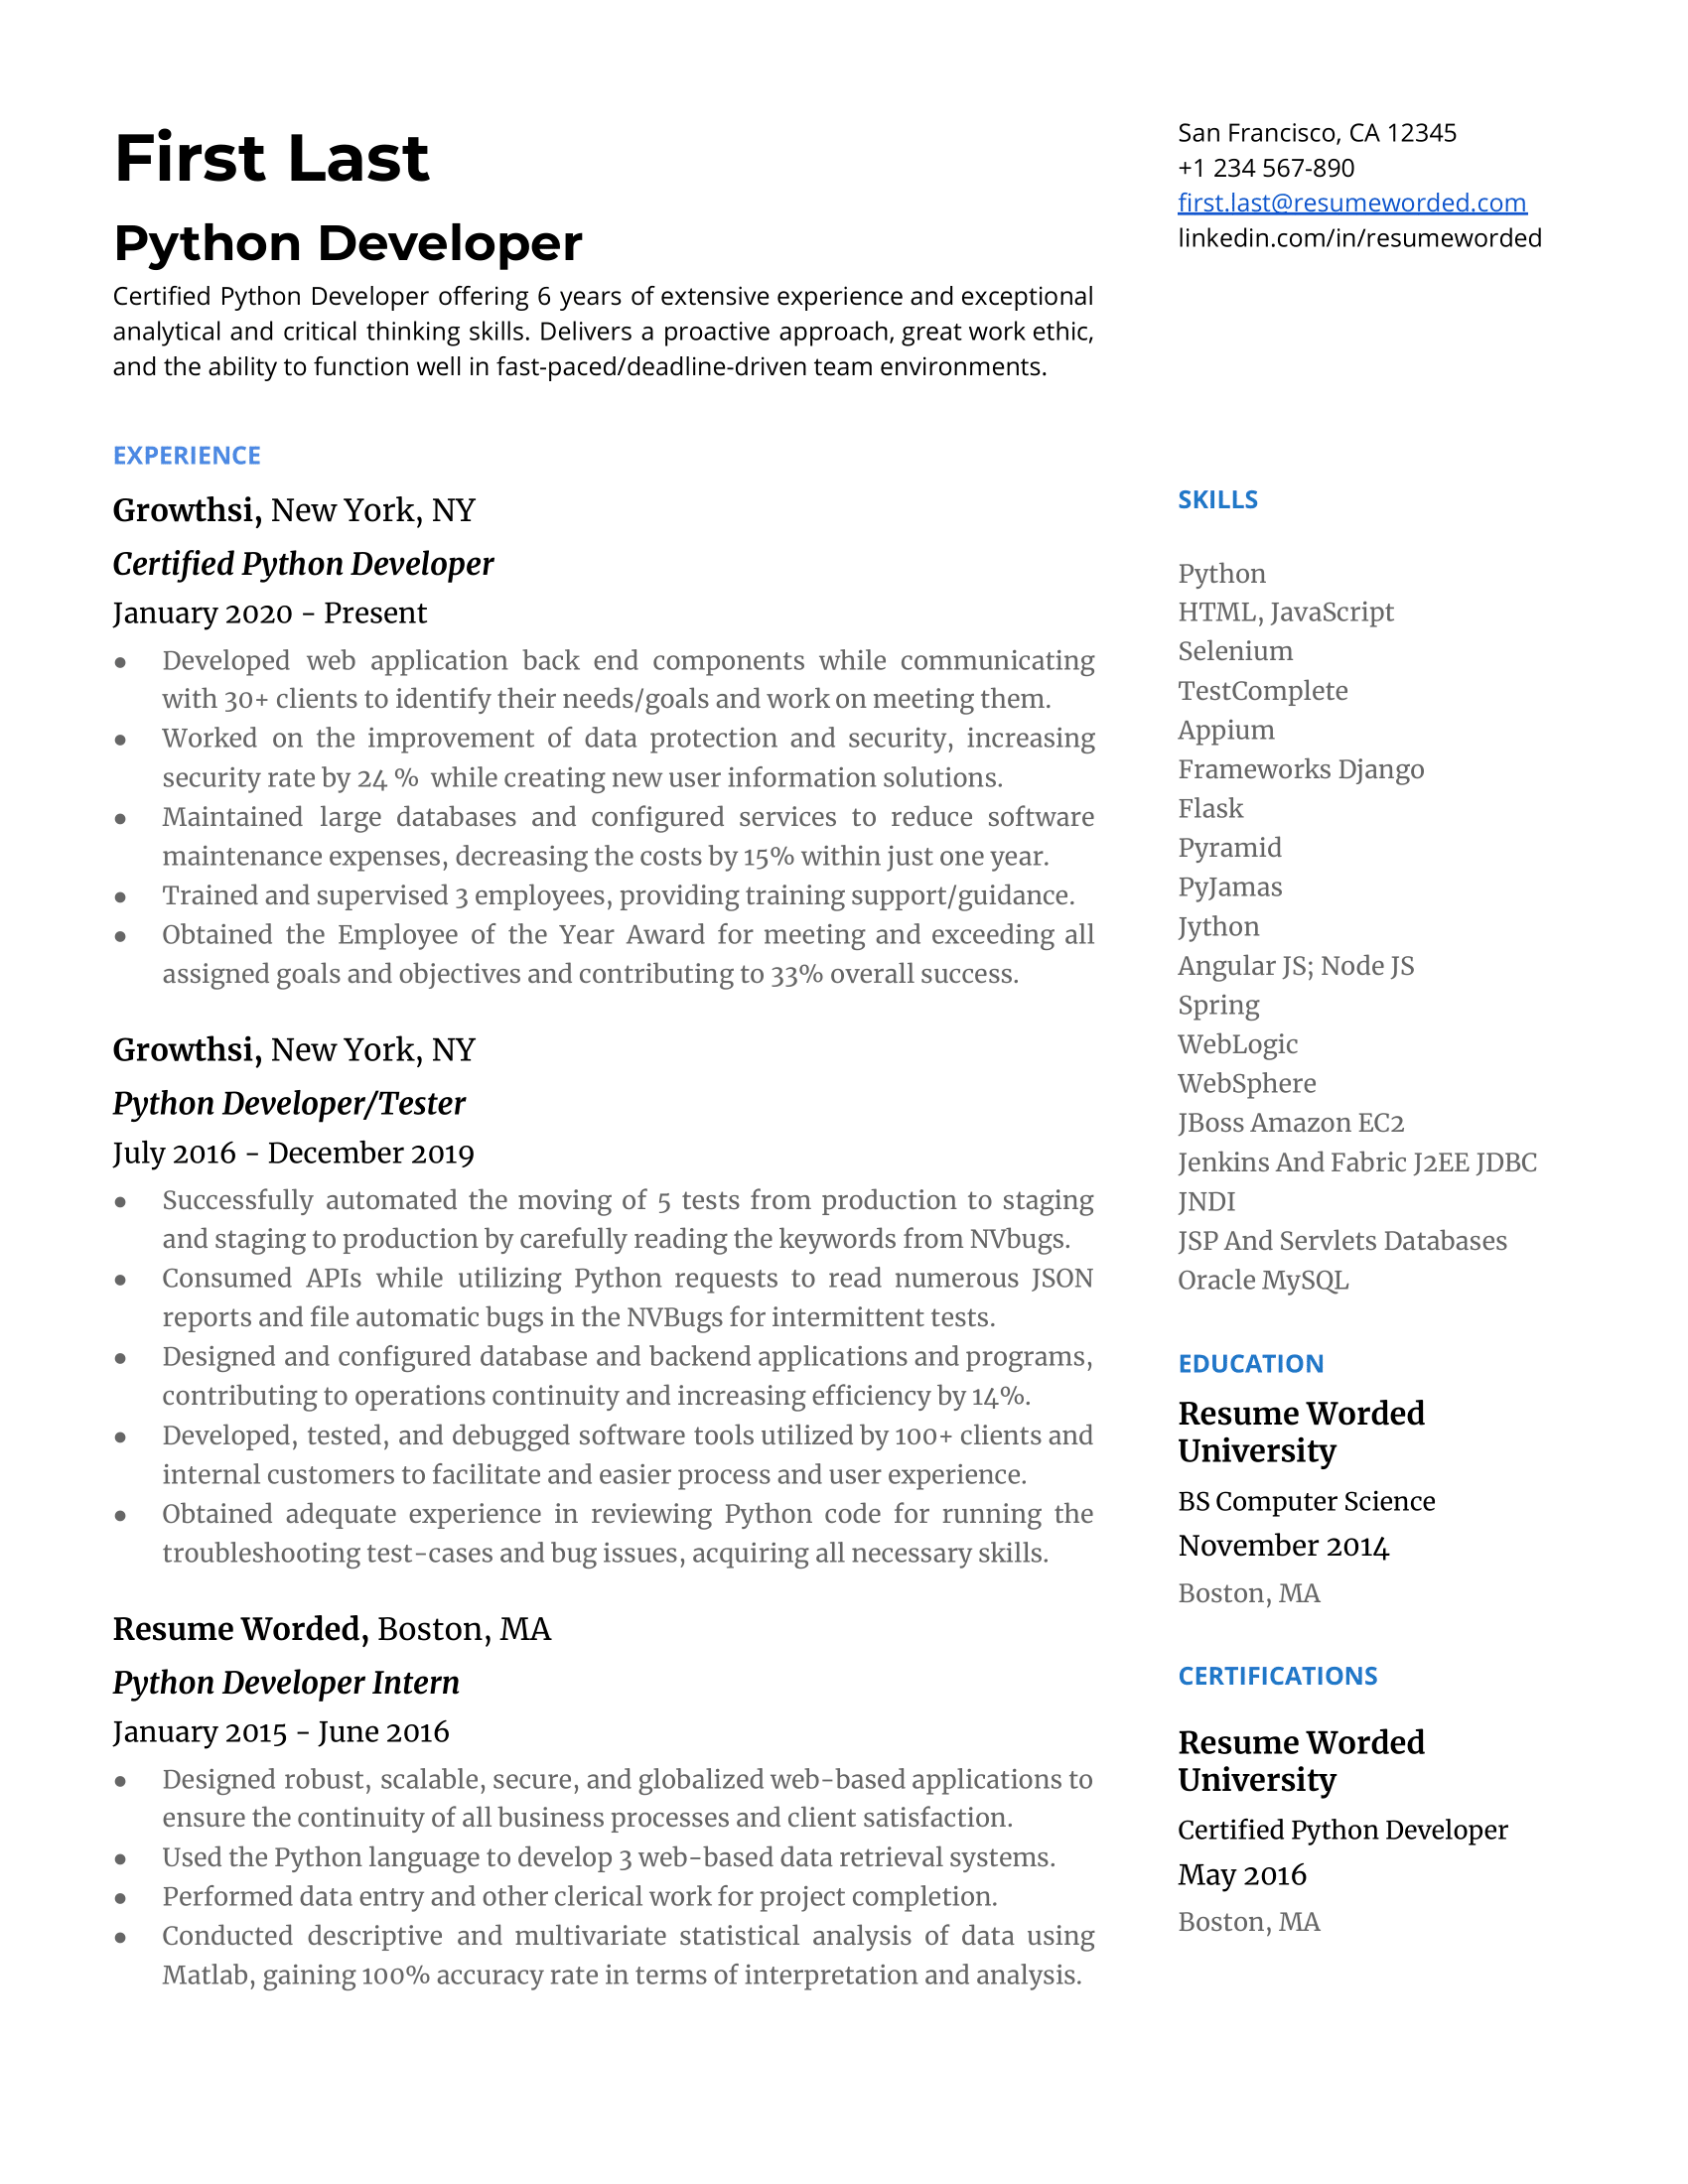 Python developer CV showcasing detailed project experience and proficiency in a variety of Python libraries and frameworks.